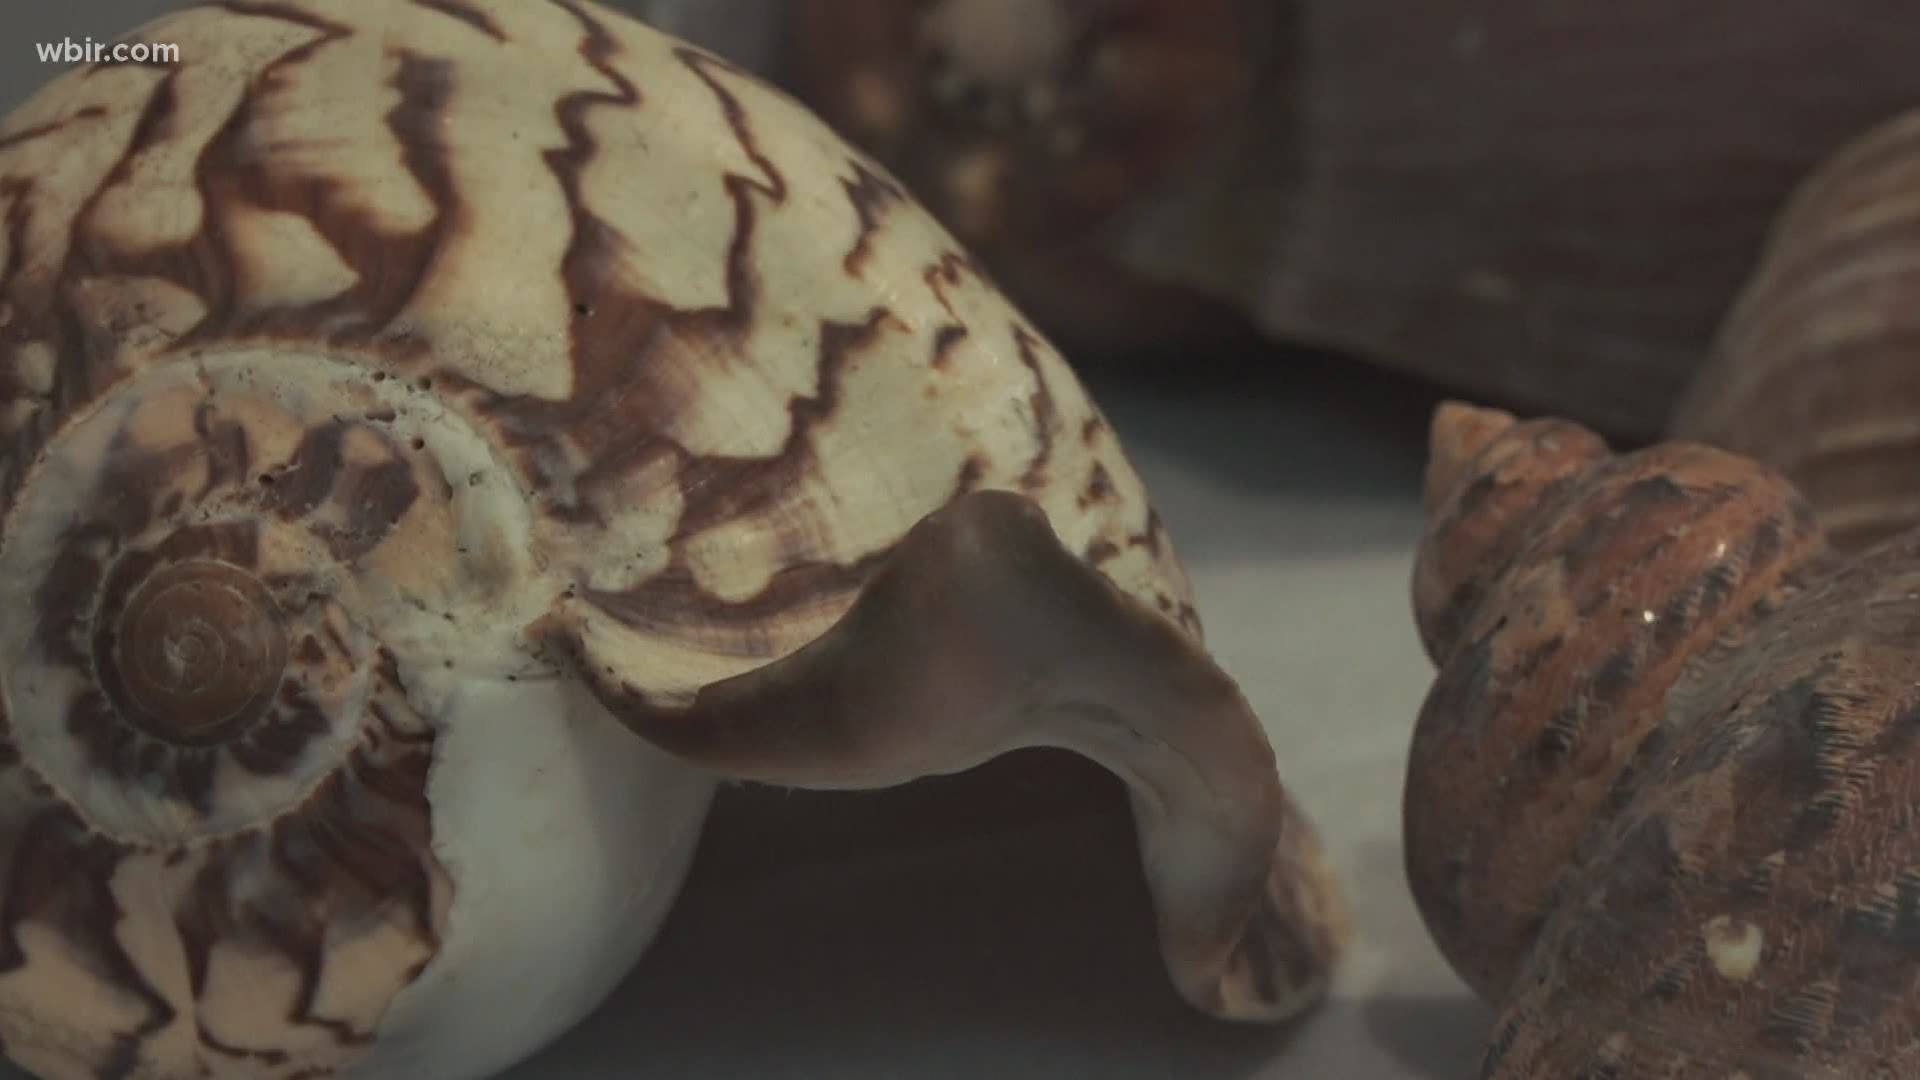 We may be a few hundred miles from the Atlantic ocean, but East Tennessee will soon have its own Seashell museum.